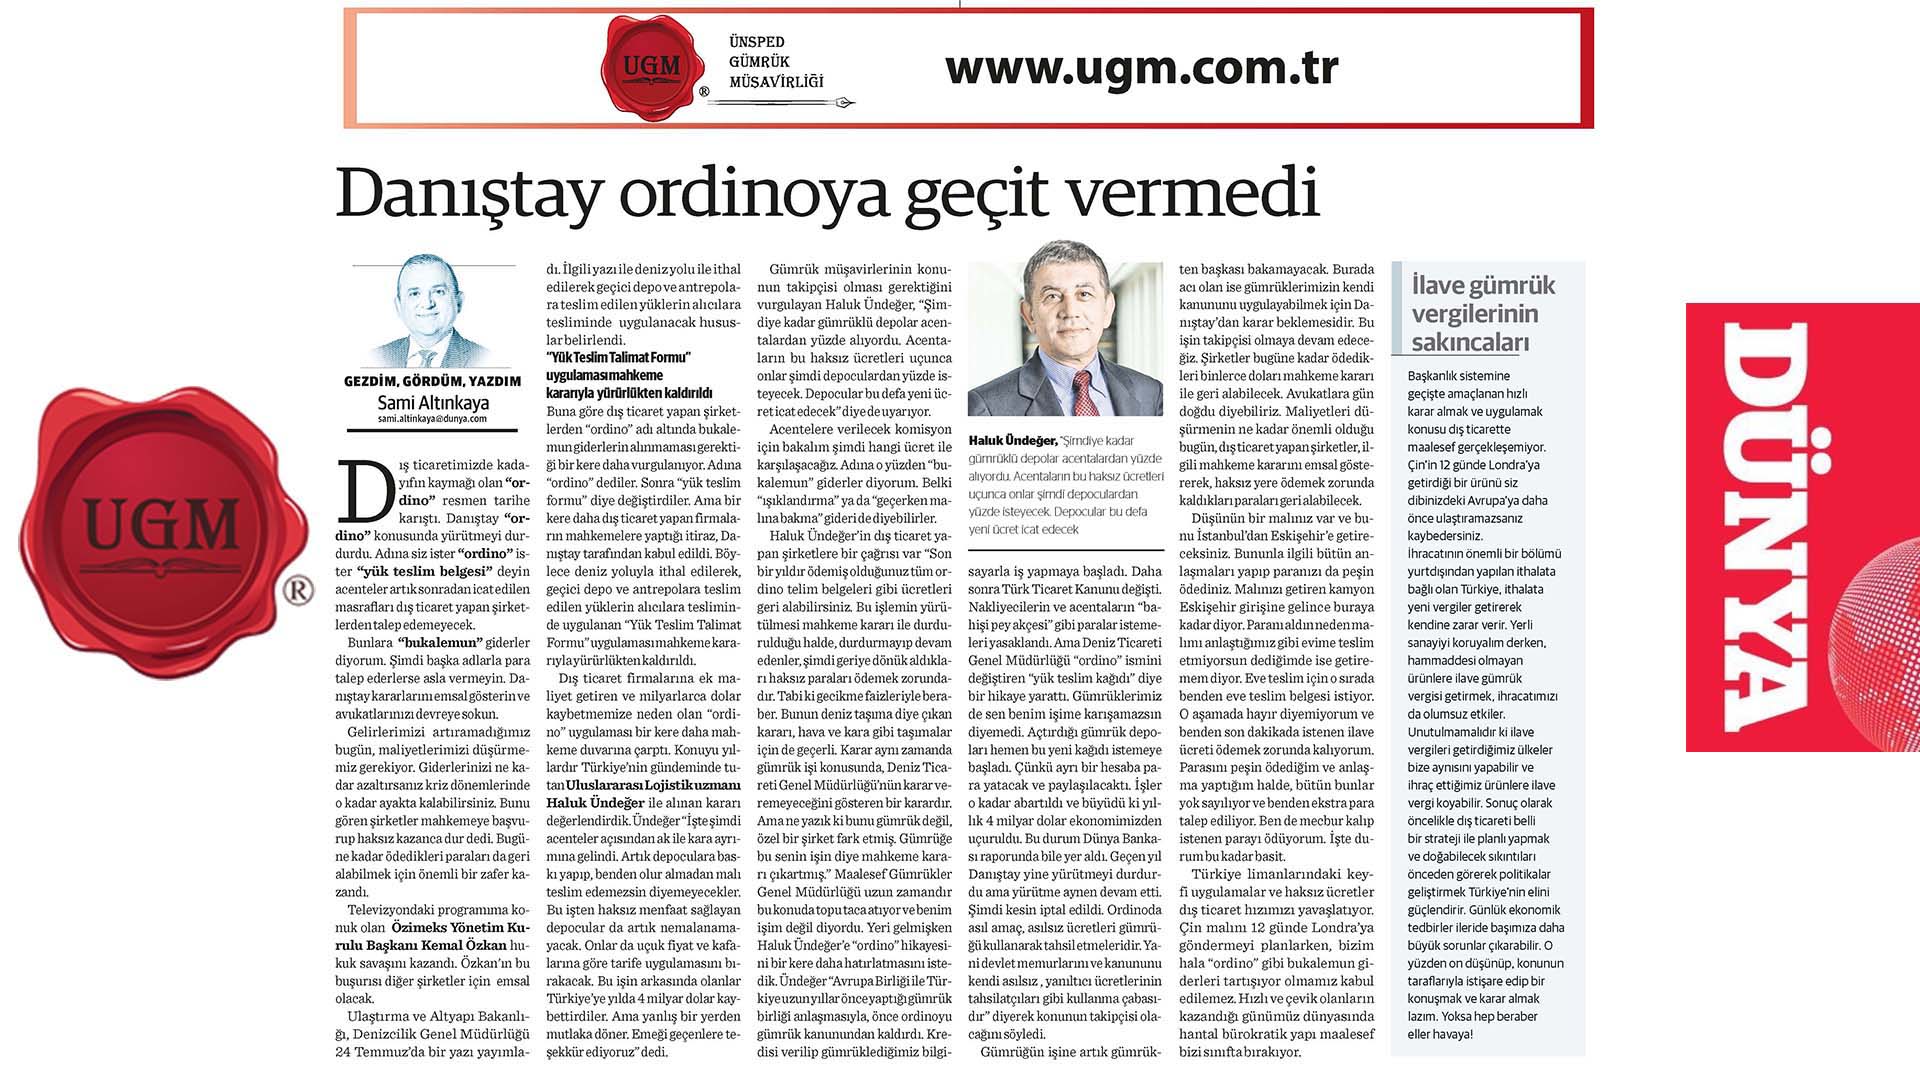 Our UGM Corporate Communications Director Sami Altınkaya's article entitled "The Council of state did not allow delivery order” was published in the Dünya newspaper on 27.07.2020.